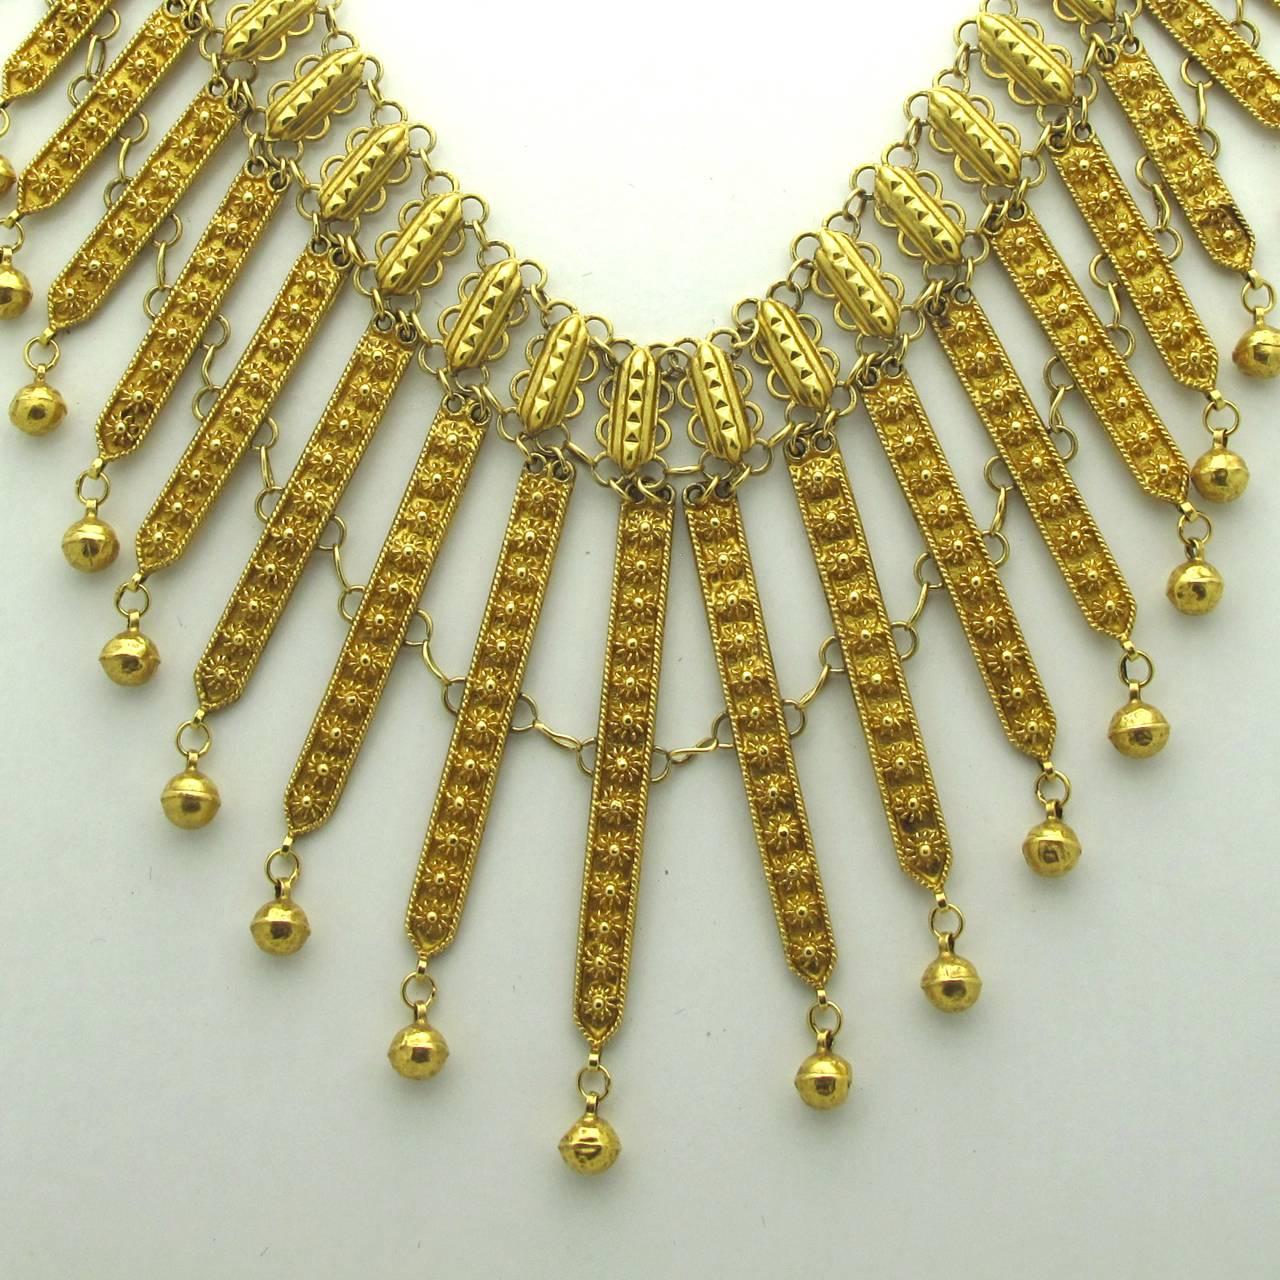 Amazingly beautiful in design and intricate detail this 18kt gold  necklace is a wonderful statement.